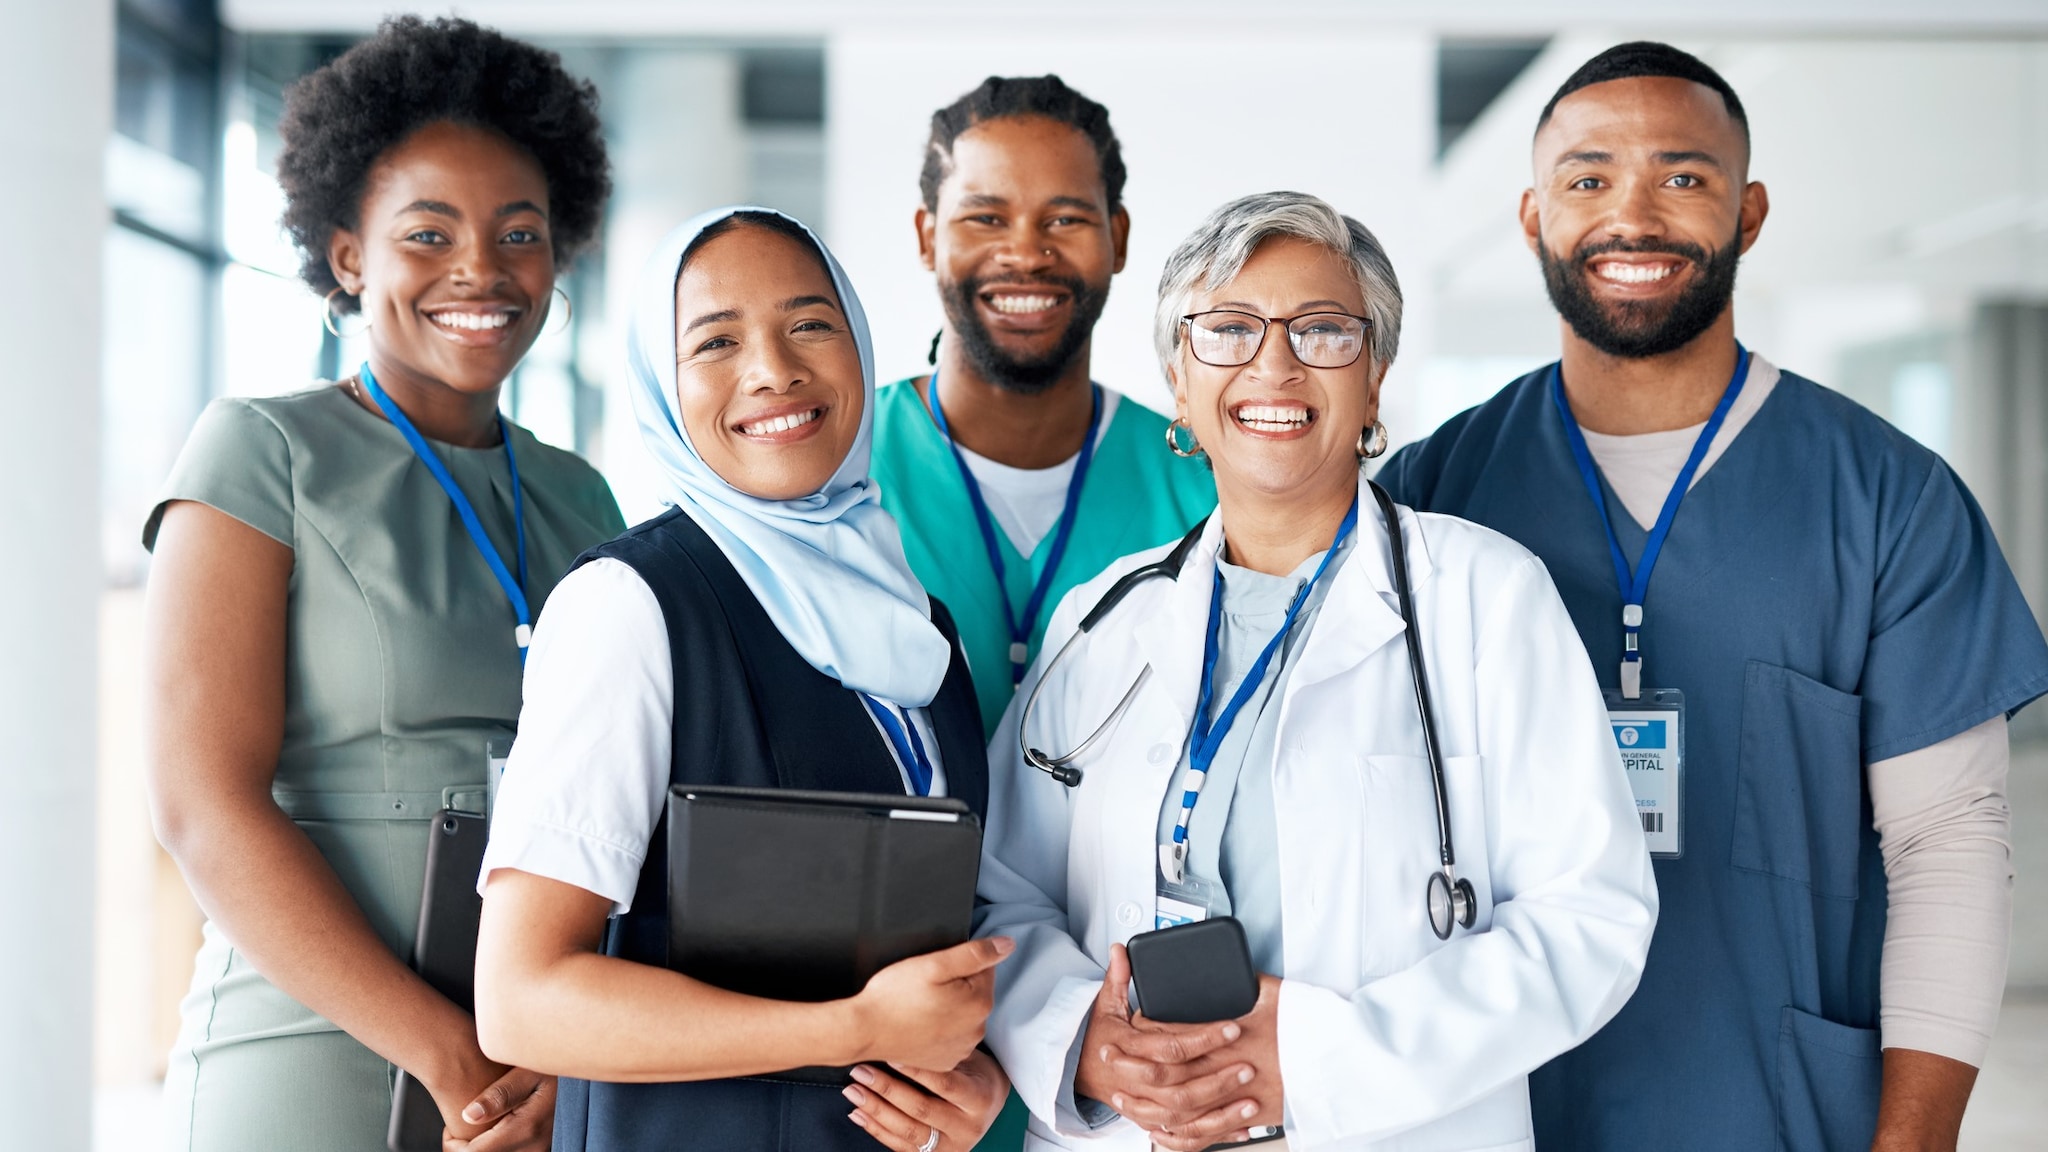 A diverse group of healthcare providers standing together for a photo, representing different ages, races, and ethnicities.